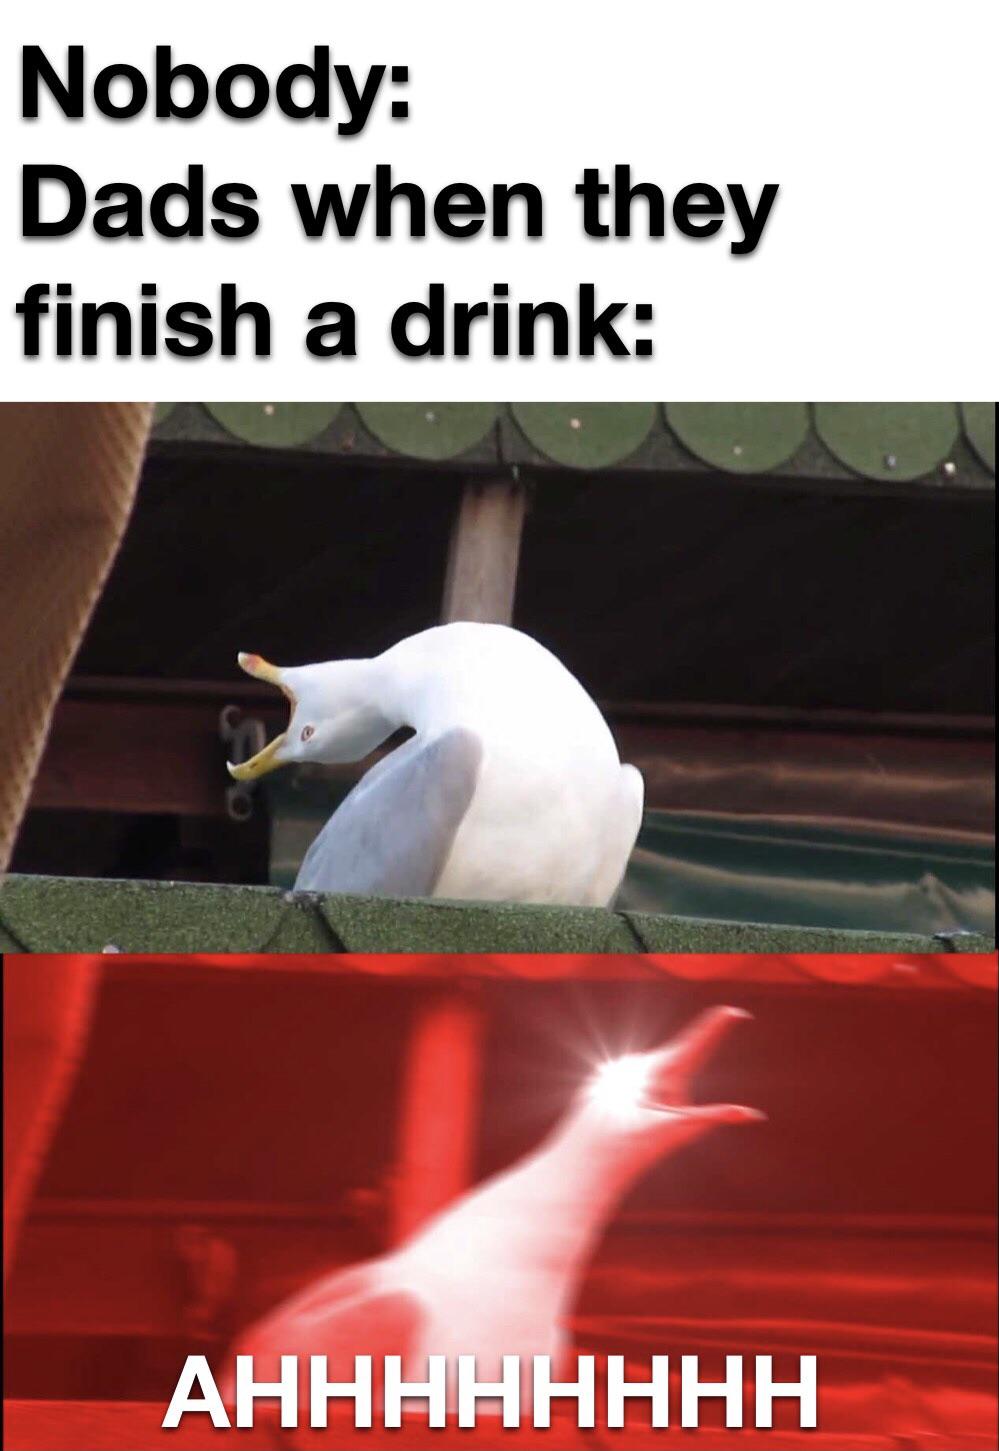 duck inhales meme - Nobody Dads when they finish a drink Ahhhhhhhh